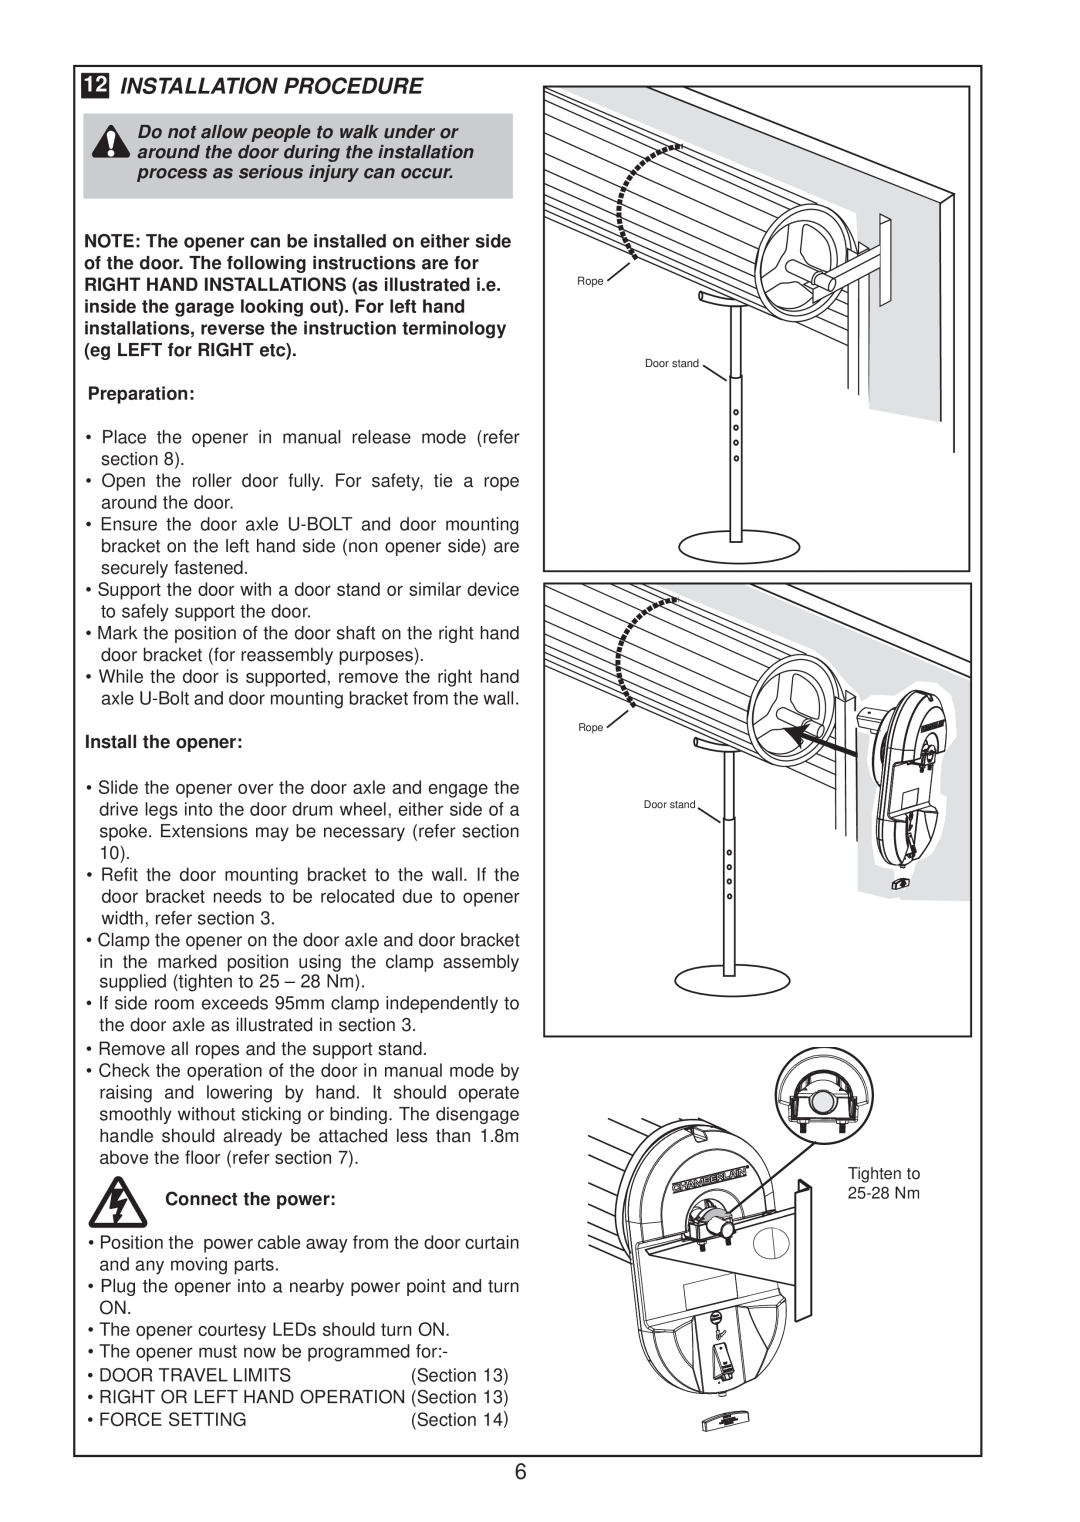 Chamberlain MR850EVO Installation Procedure, NOTE The opener can be installed on either side, eg LEFT for RIGHT etc 